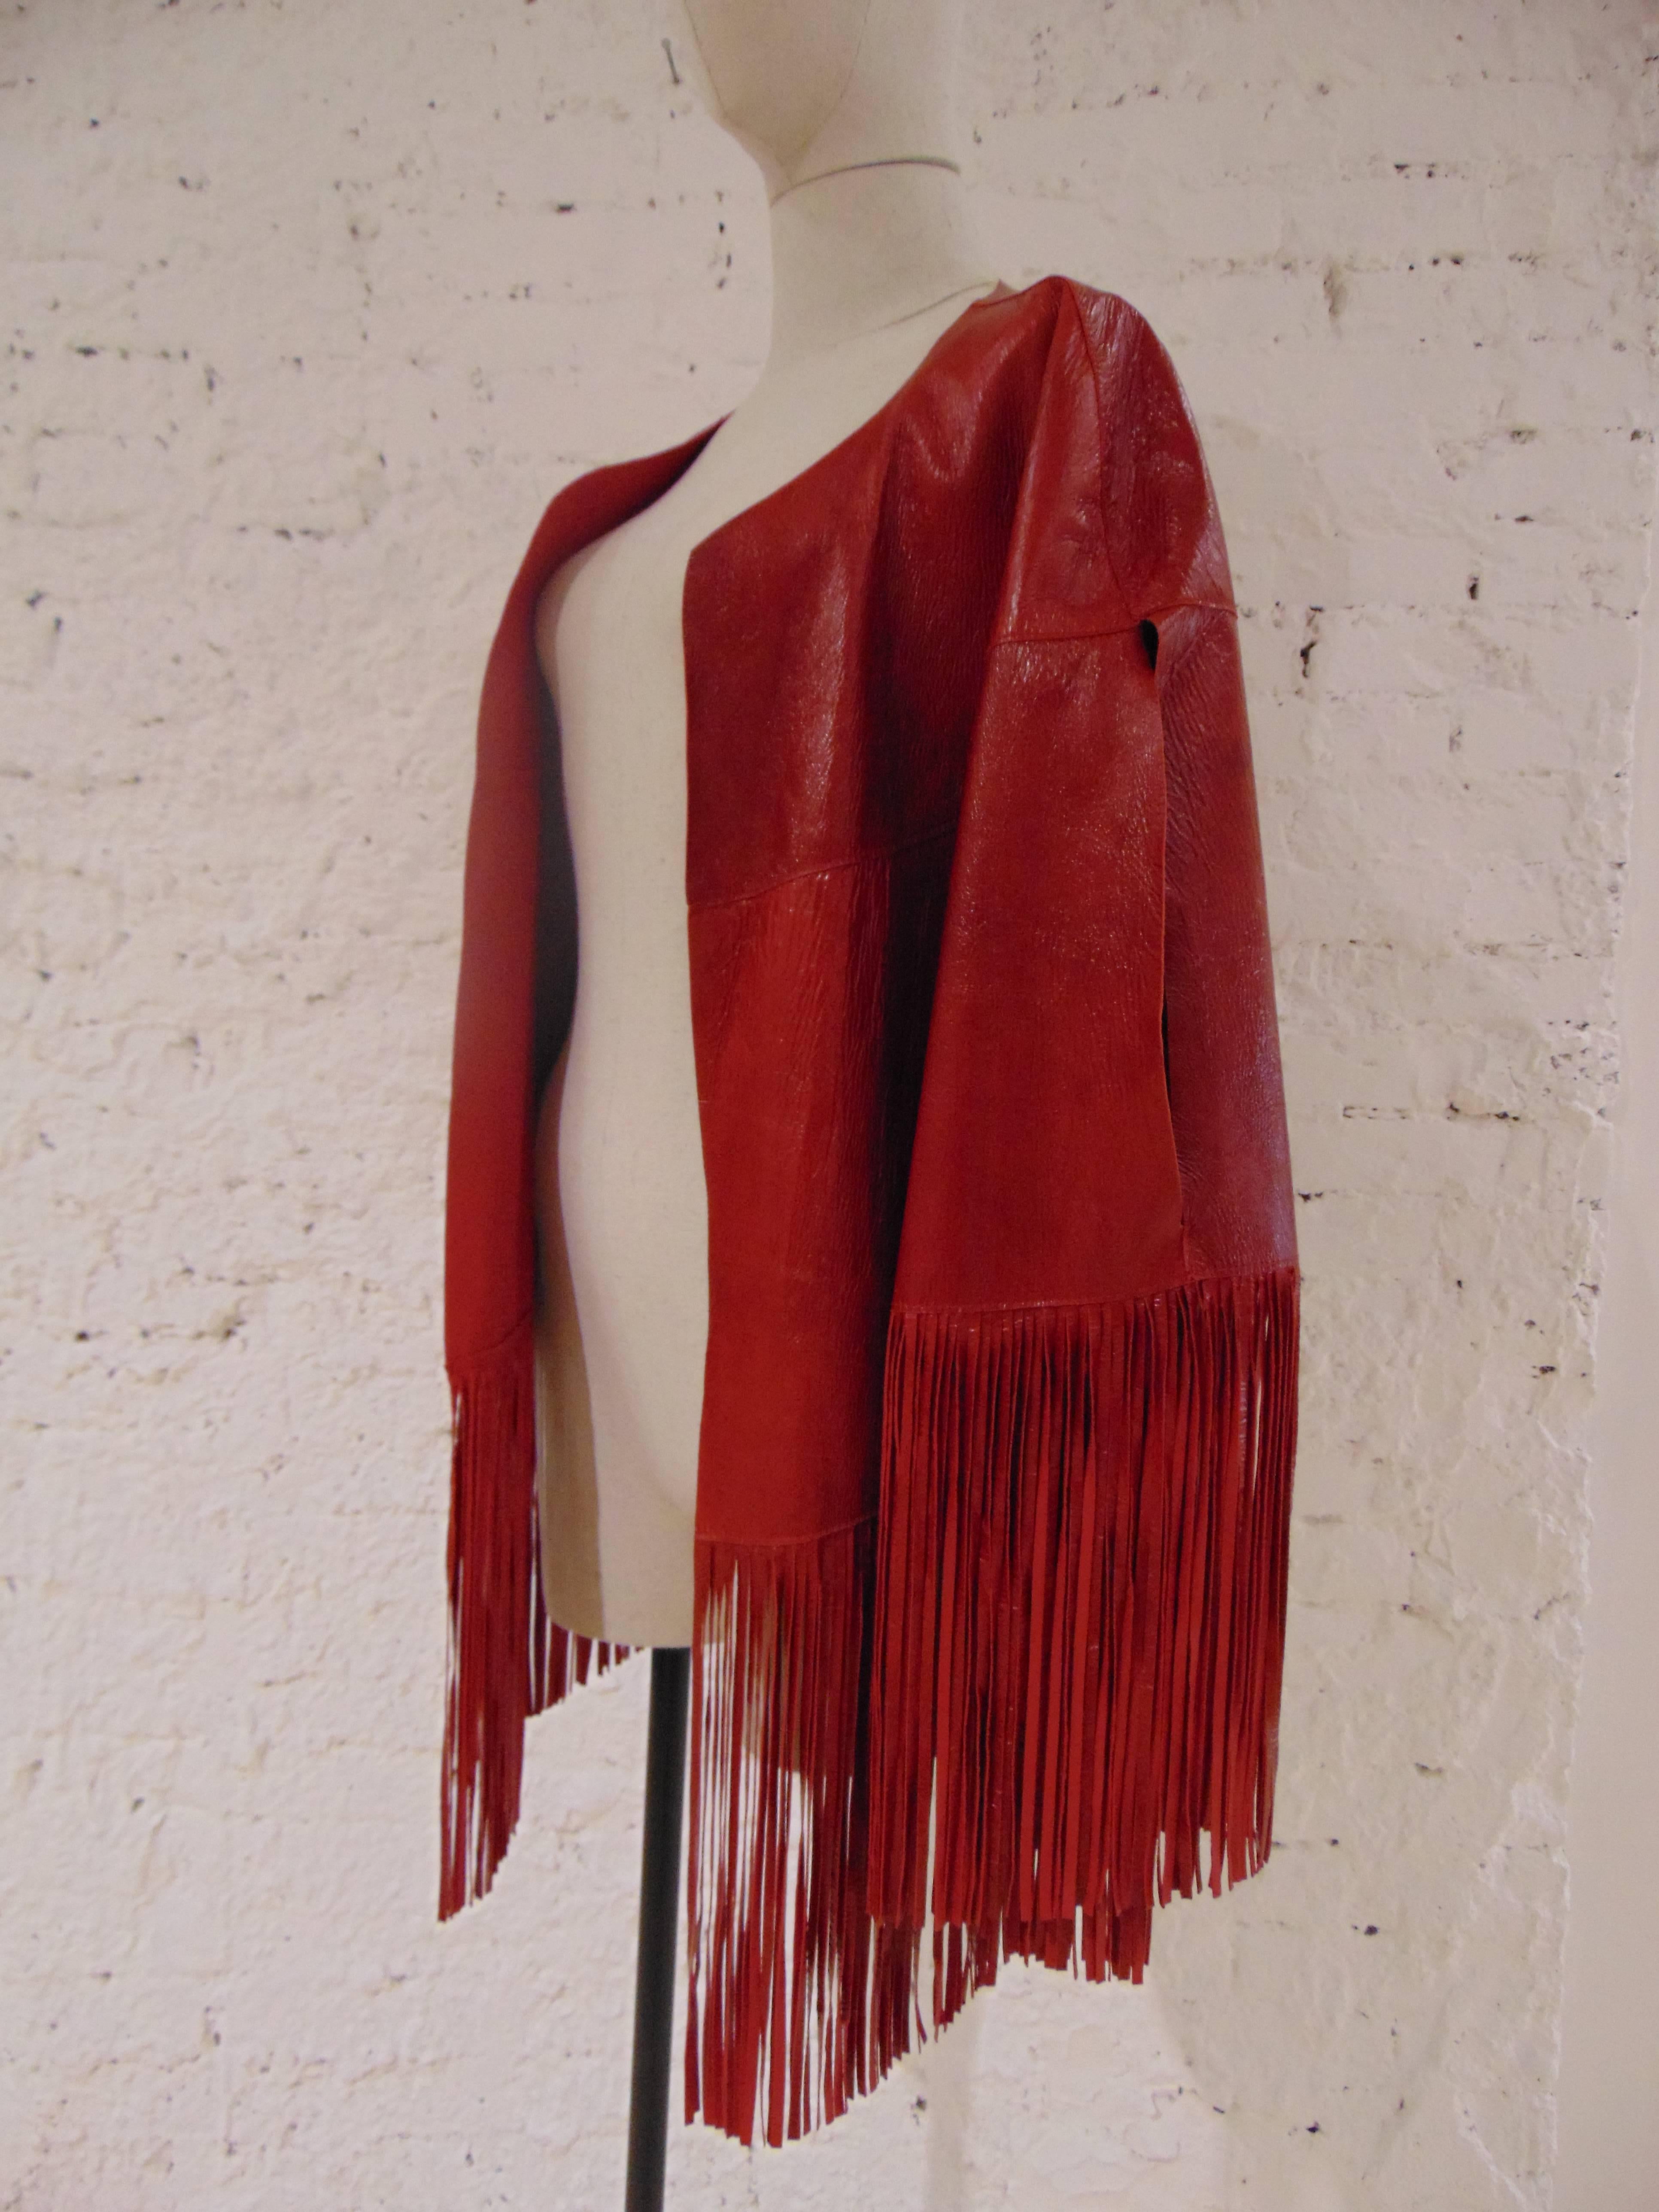 Leitmotiv unworn NWOT real leather red fringes jacket
totally made in italy in size OS